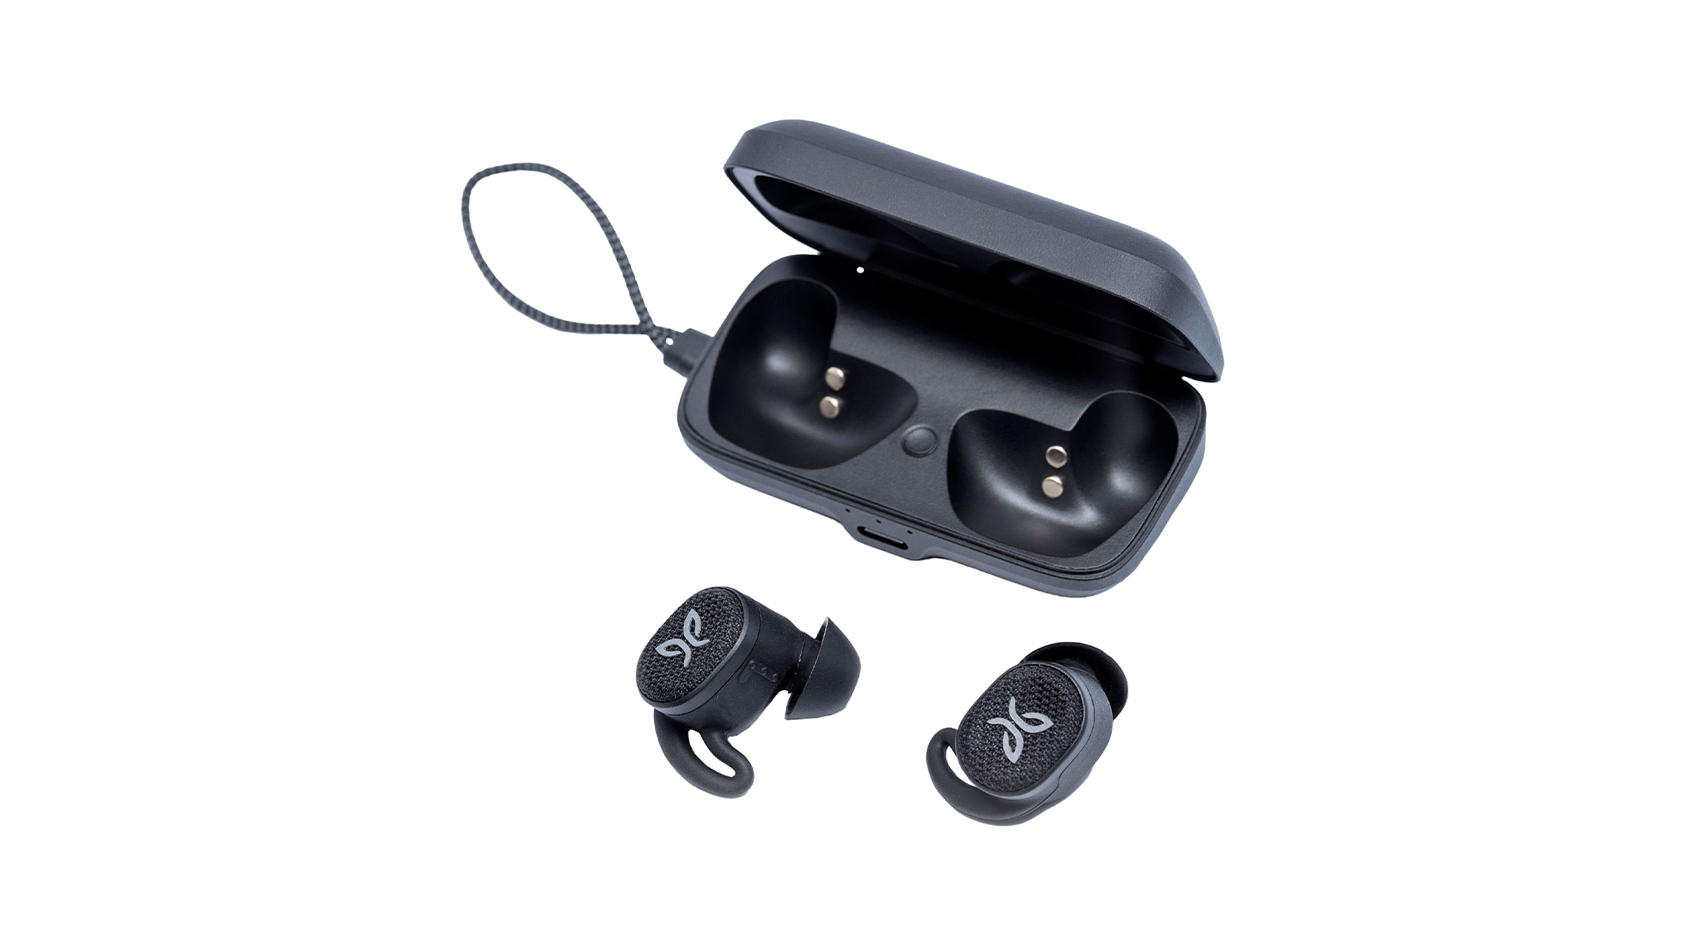 These True Wireless Sports Earbuds Offer An Amazing 80 Hours Of